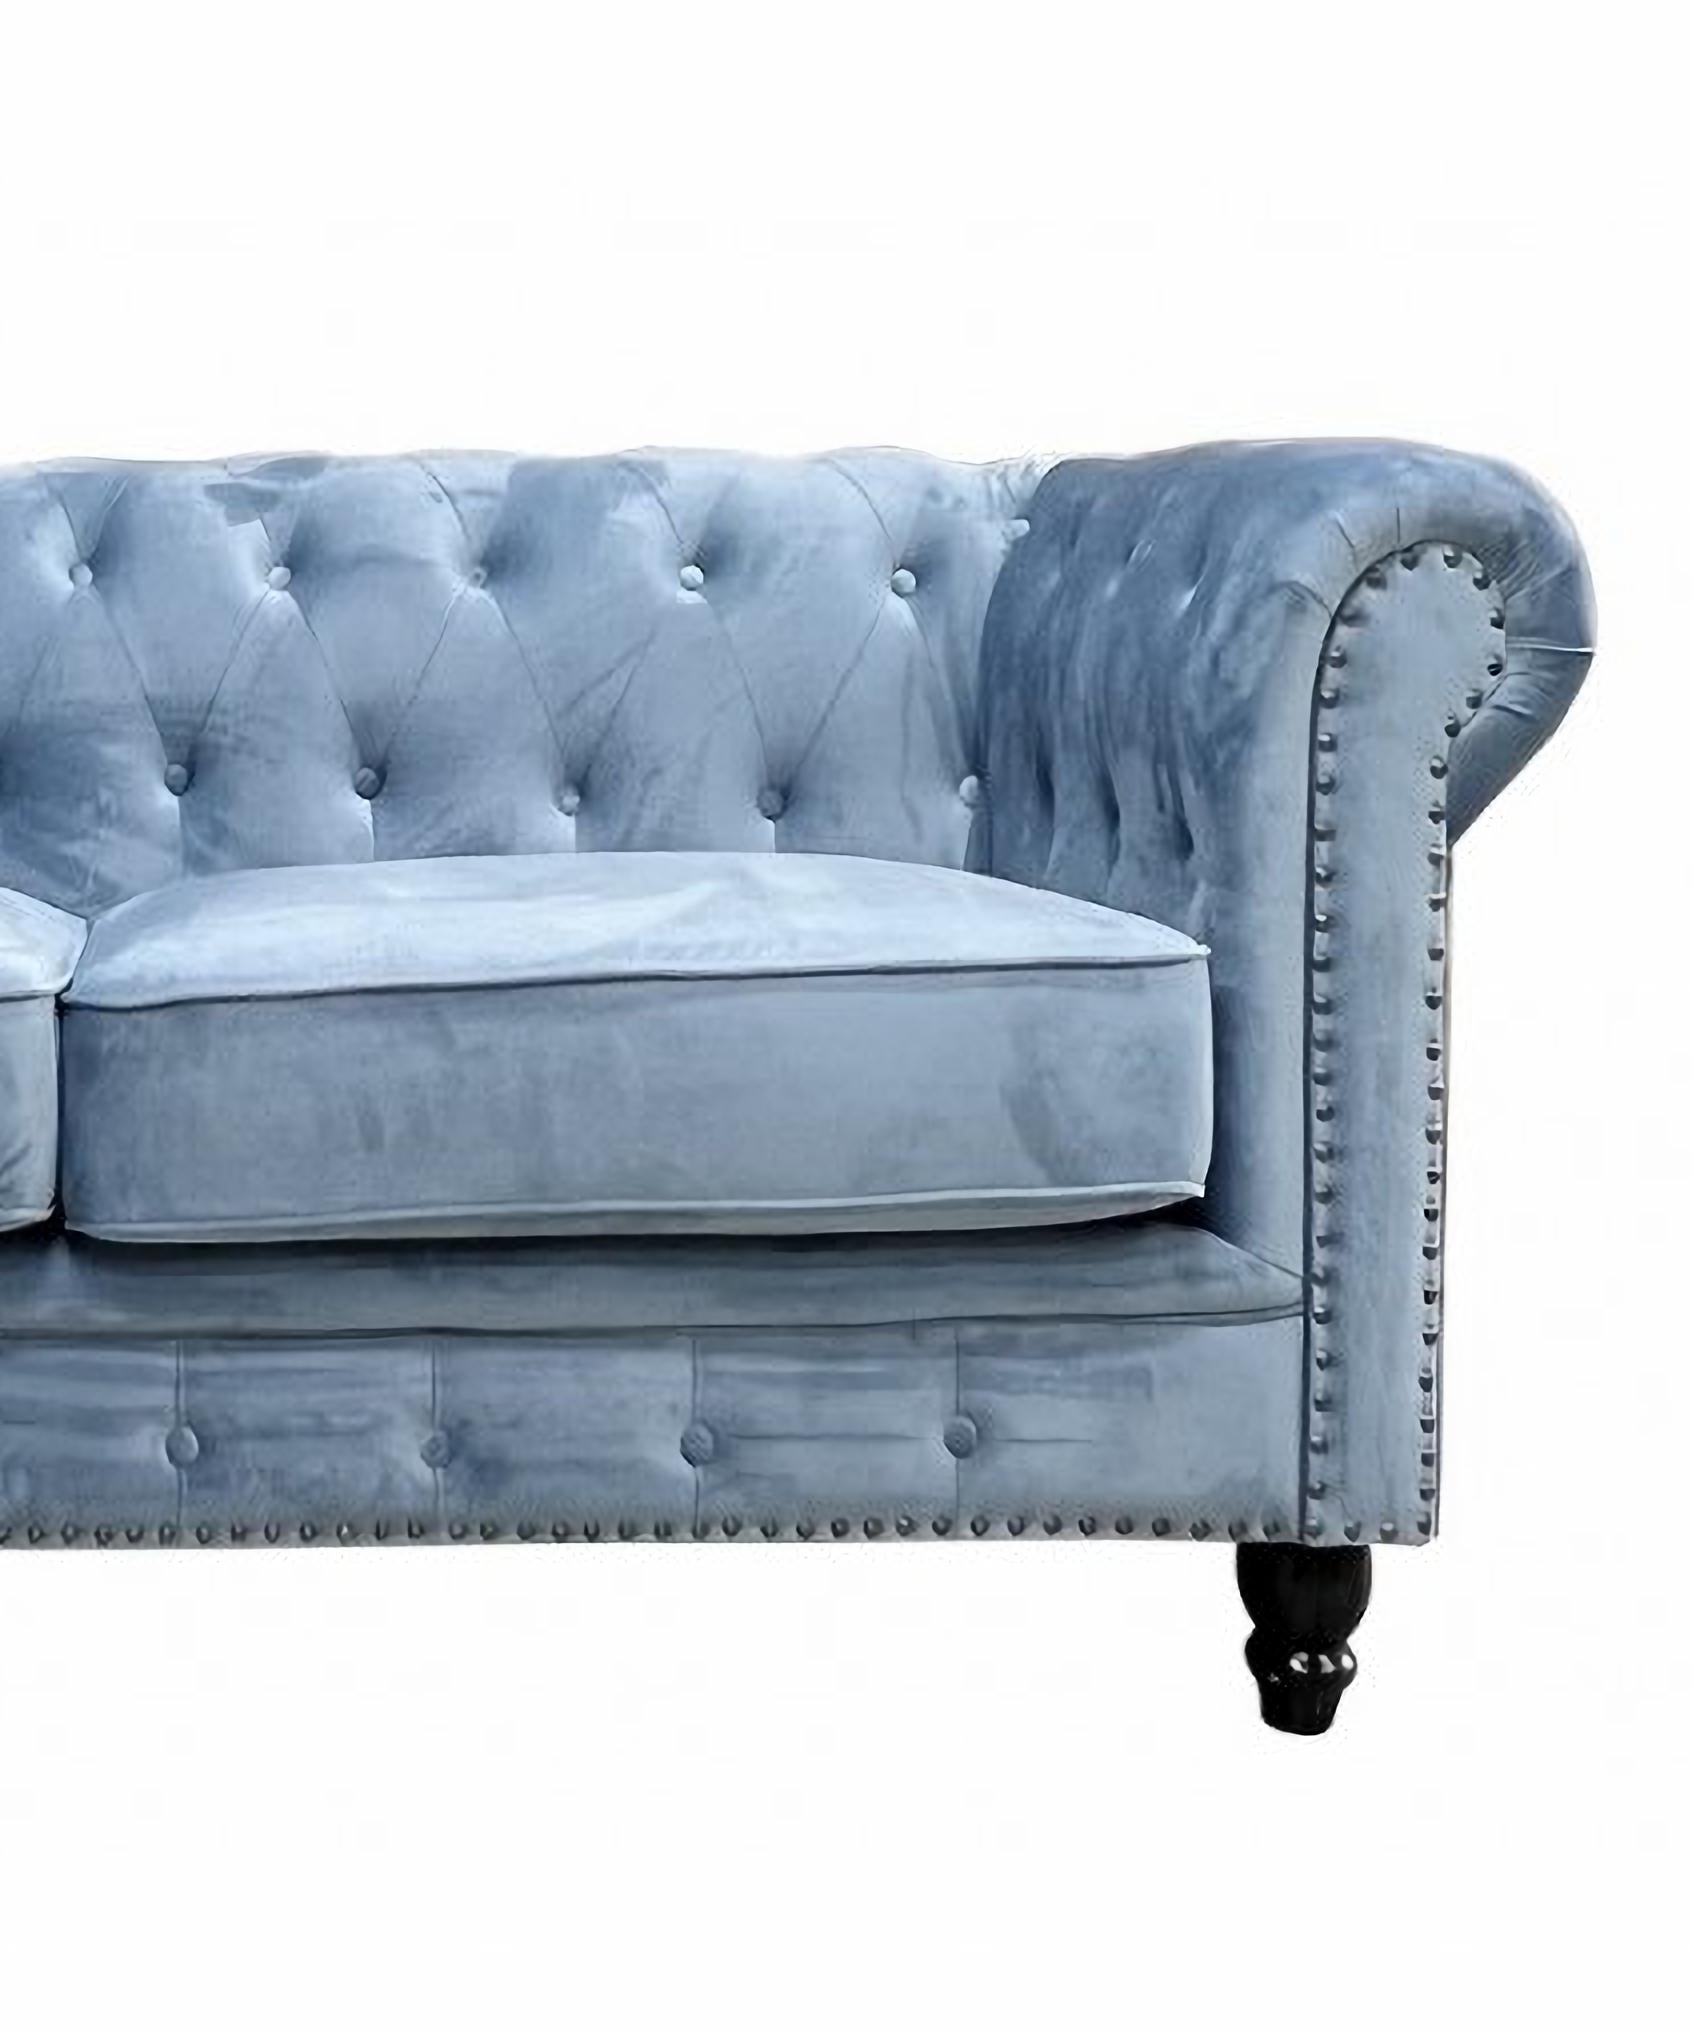 Chester Premium 3-seater sofa, dusky blue velvet upholstery

-Design sofa, 3 seats.

-Made with a solid wooden structure.

-High density polyurethane foam.

-Upholstered in navy blue velvet fabric

-2-seater sofa to match,